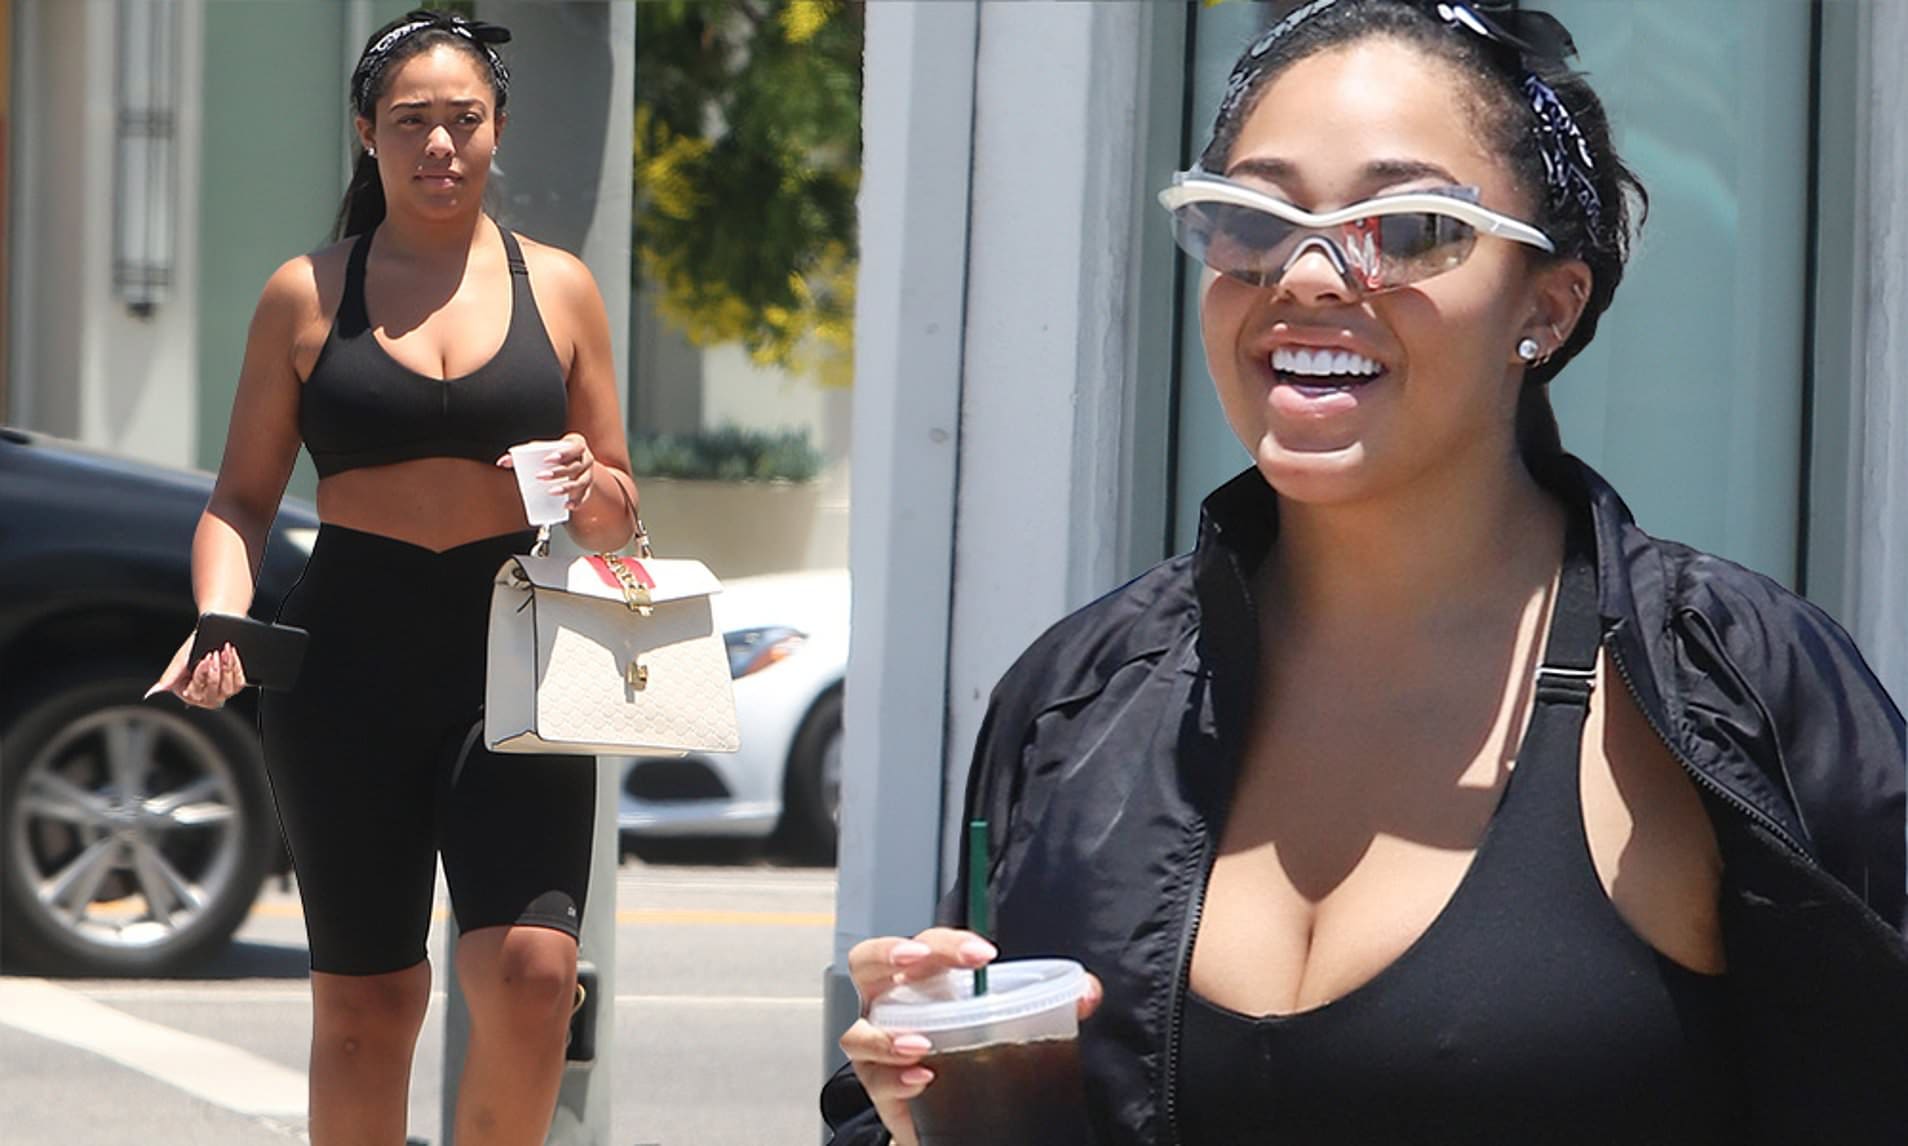 Jordyn Woods Flaunts Her Tiny Waist And Impresses Fans - Her Workout Sessions Paid Off